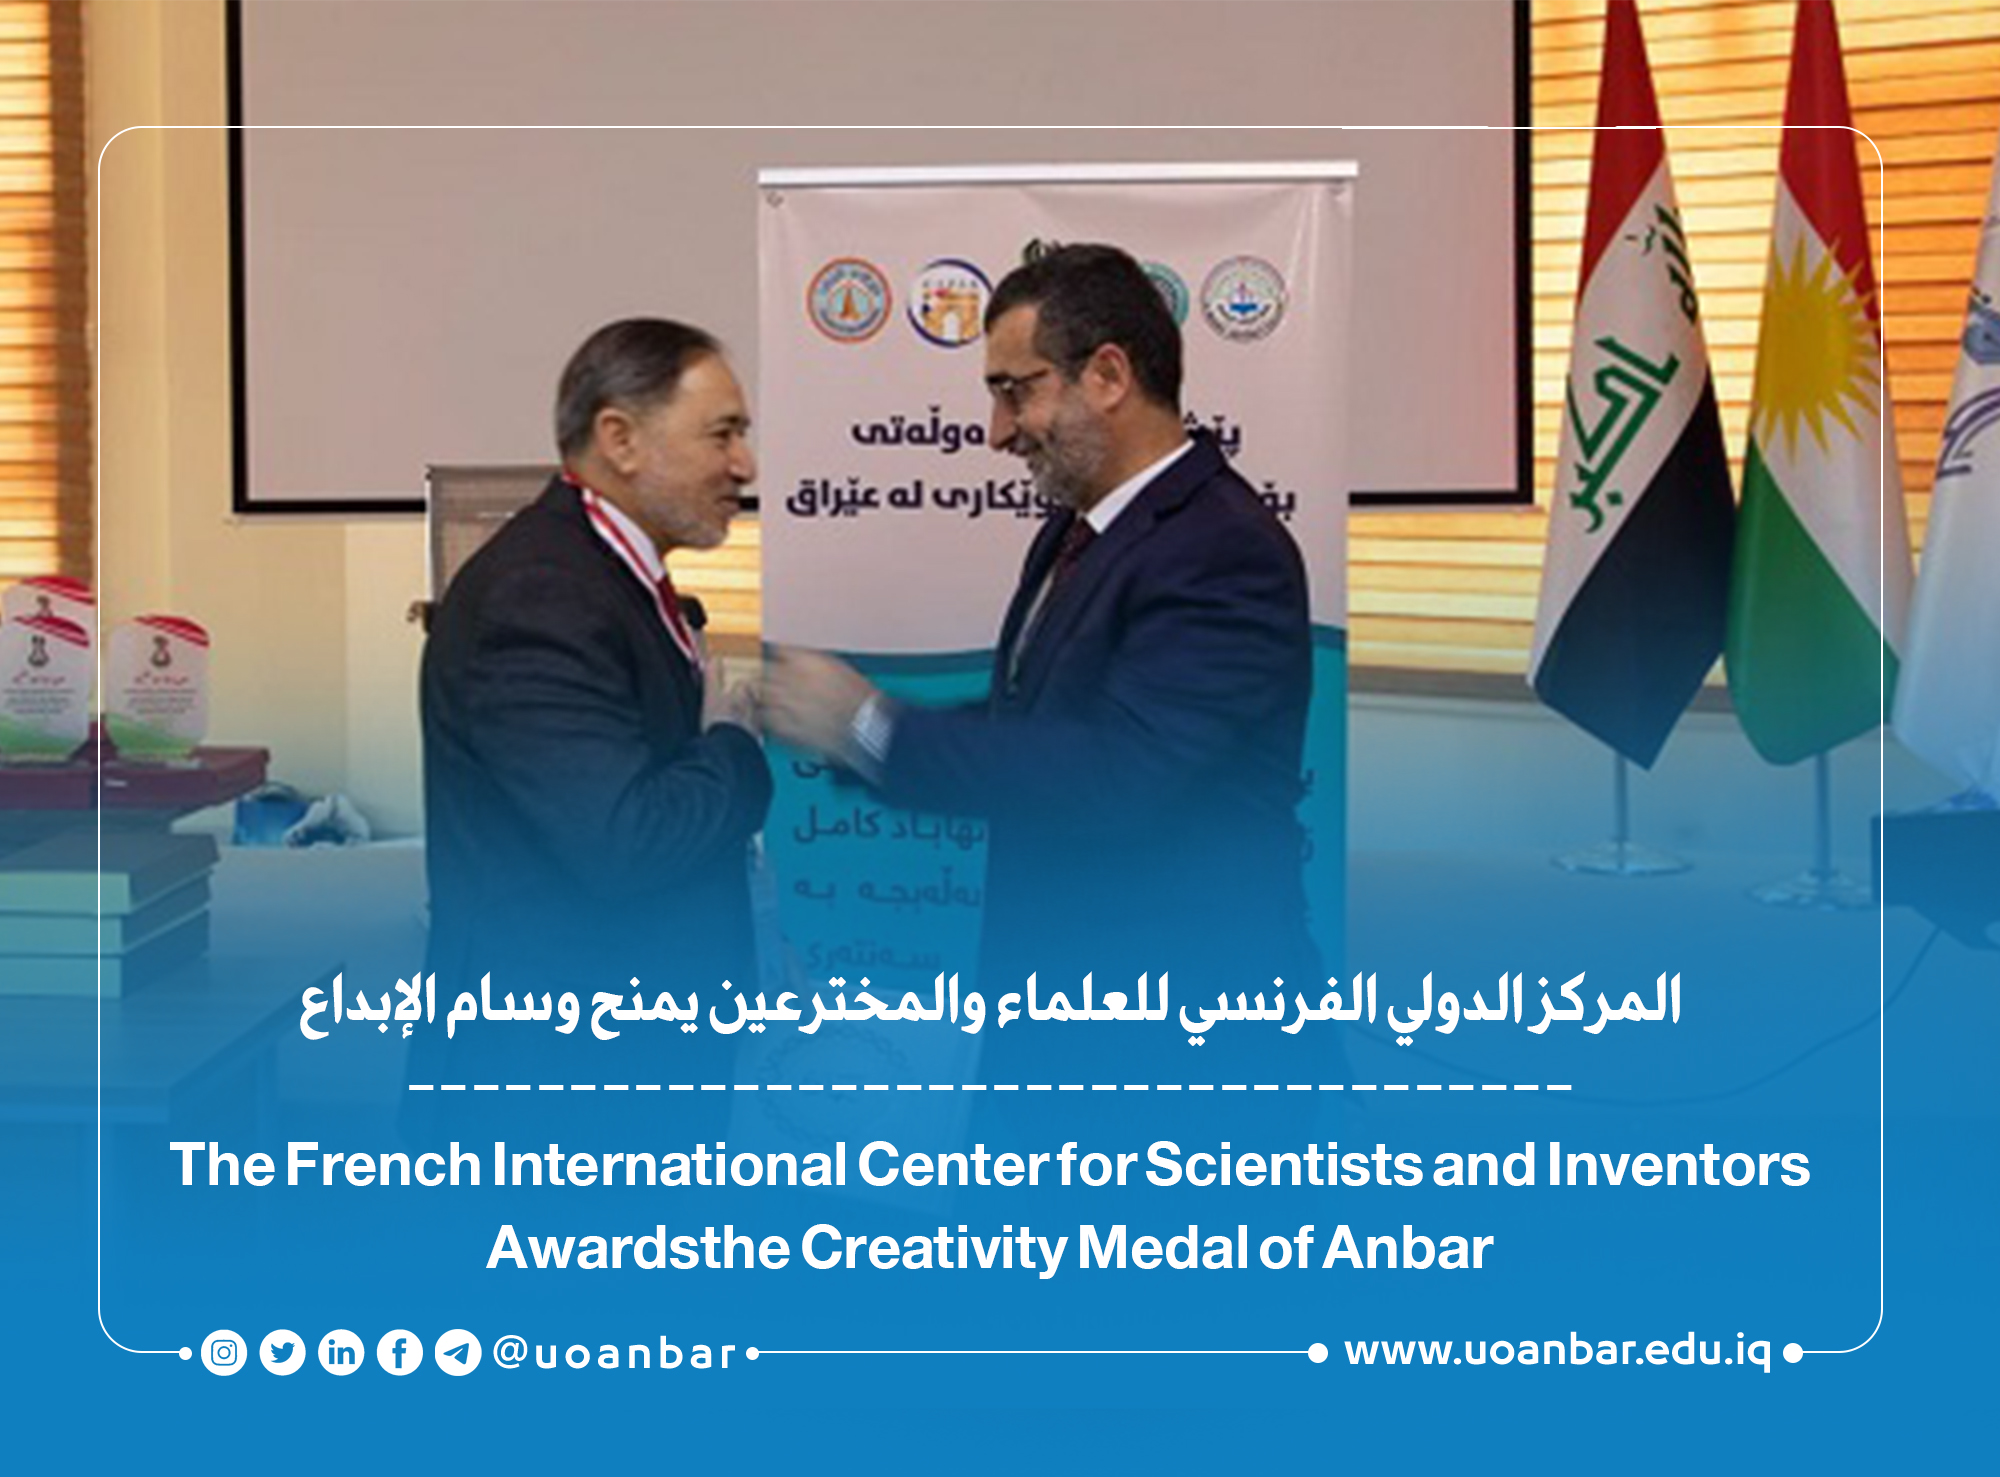 The French International Center for Scientists and Inventors Awards the Creativity Medal to Researchers from the University of Anbar